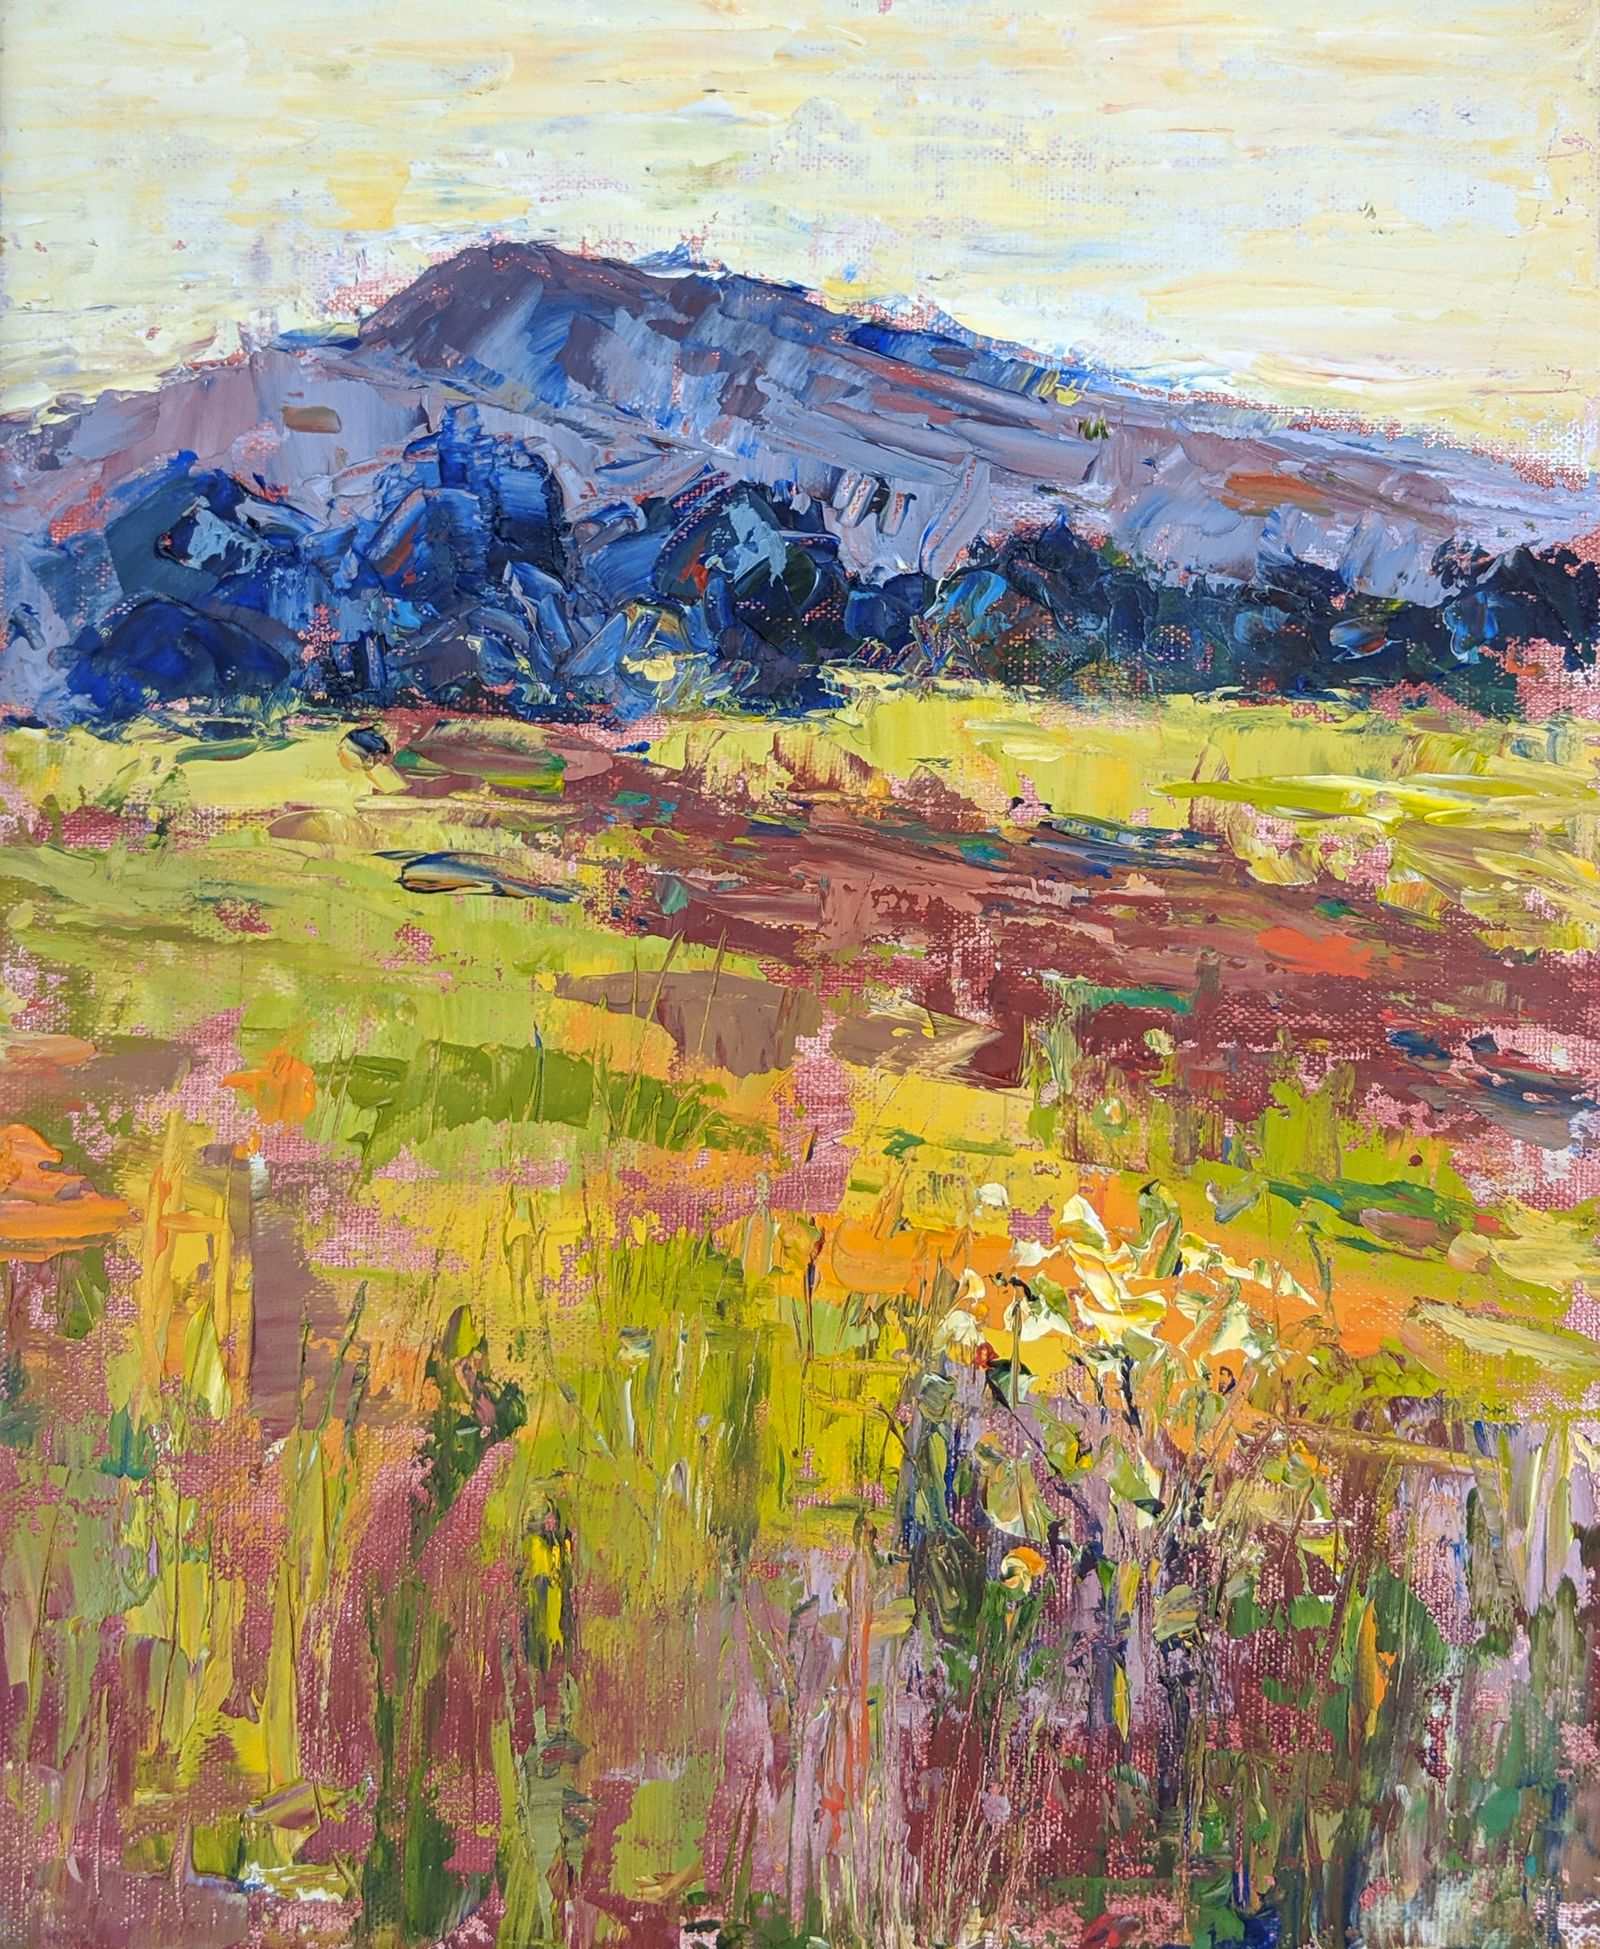 This is a Plein Air oil painting using imagined color of a meadow of summer grasses and flowers in front of a near distant mountain.